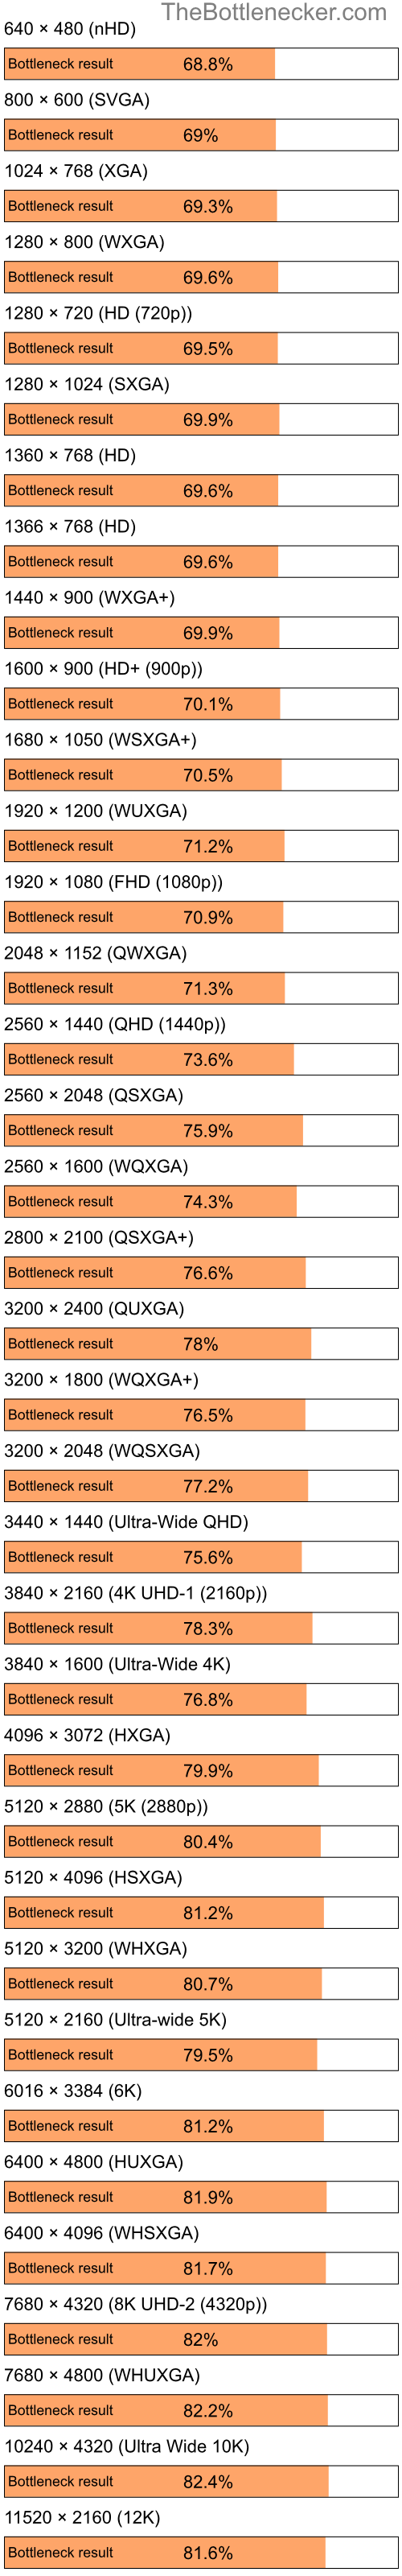 Bottleneck results by resolution for Intel Atom Z520 and NVIDIA Quadro FX 3400 in Graphic Card Intense Tasks